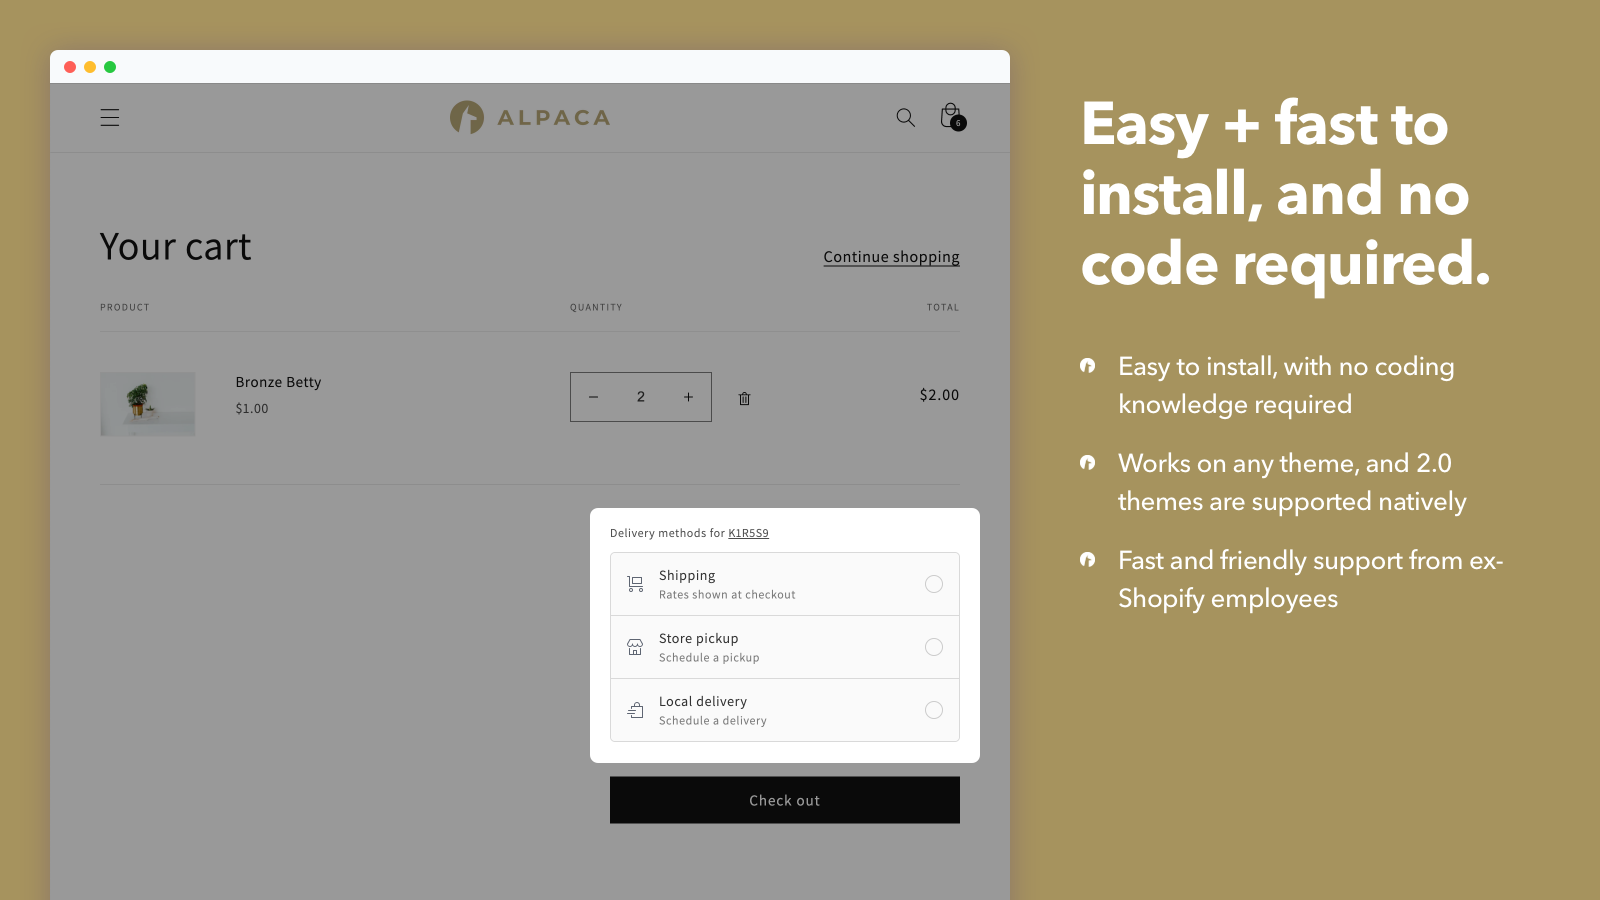 Easy + fast to install, and no code required.